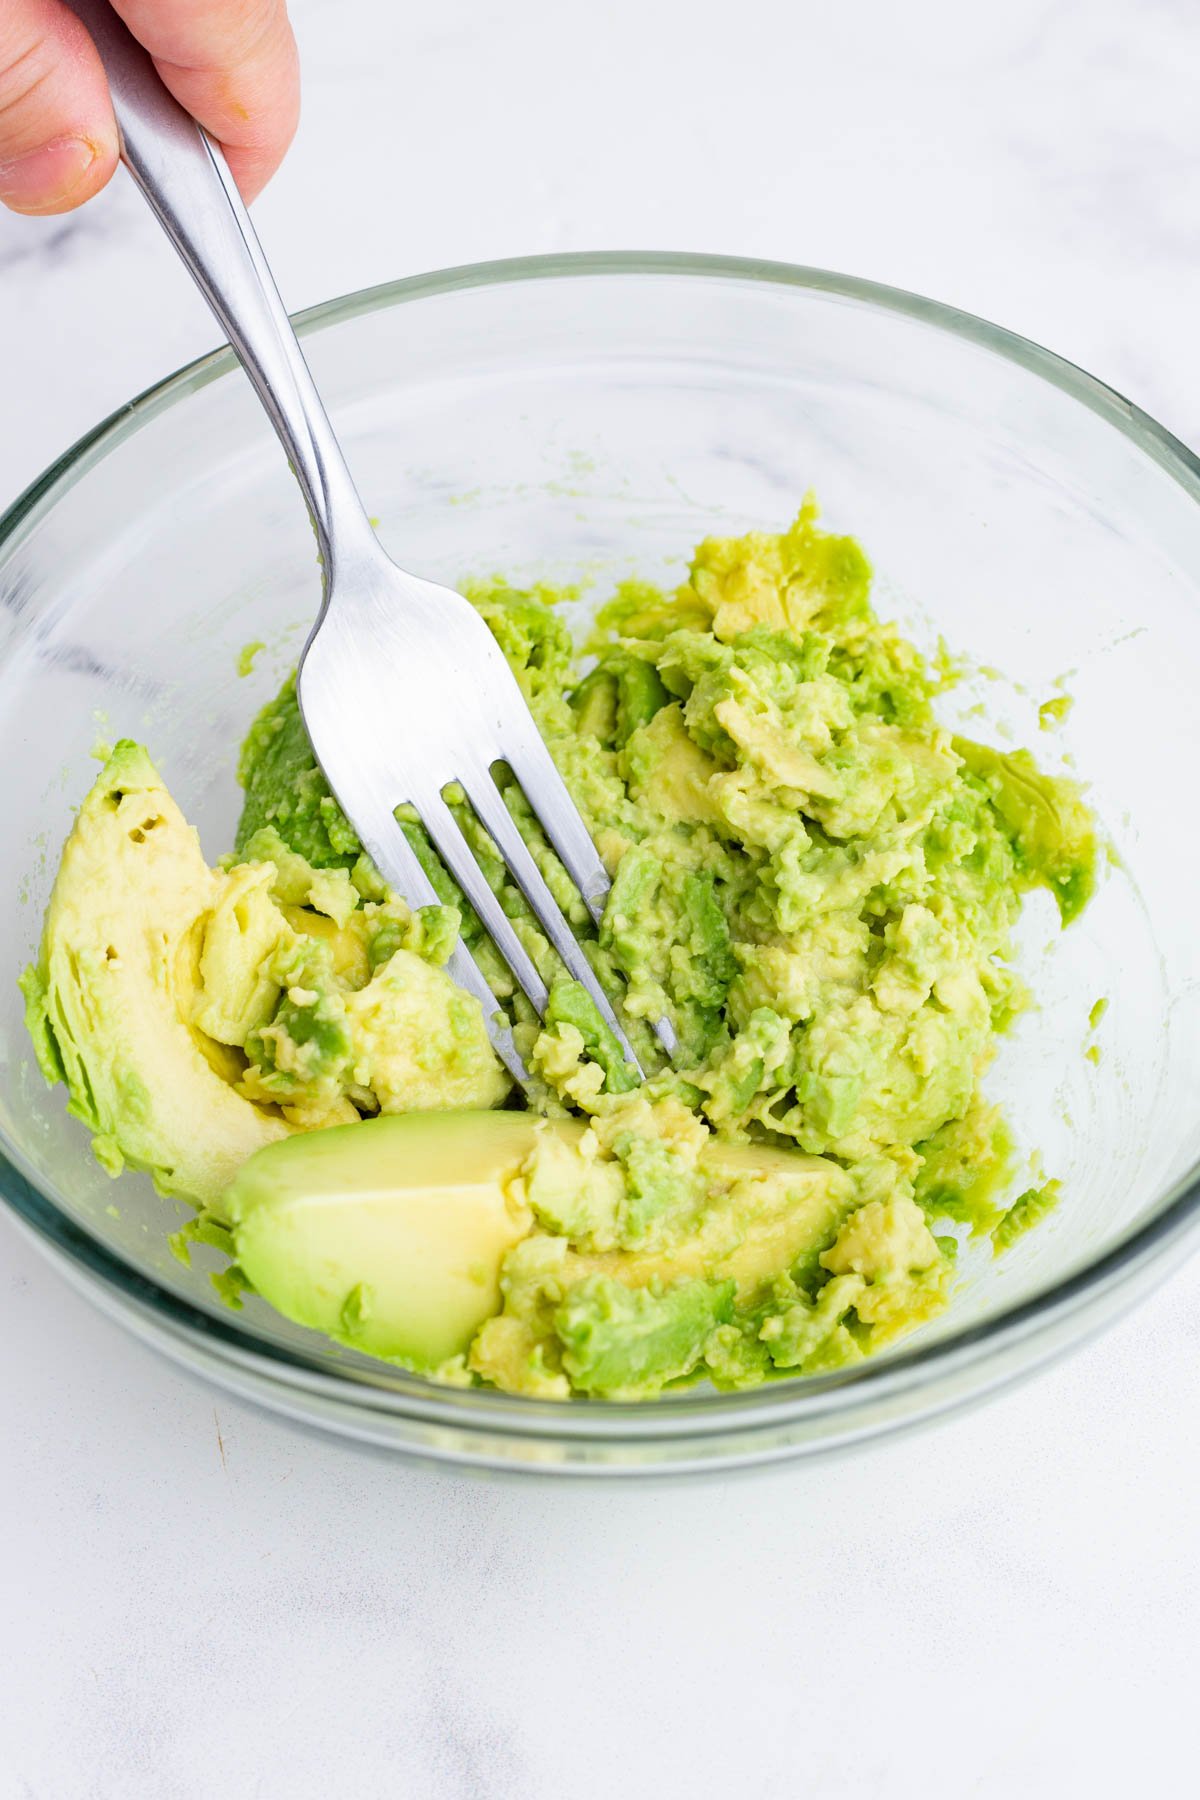 Avocados are mashed with a fork in a bowl.